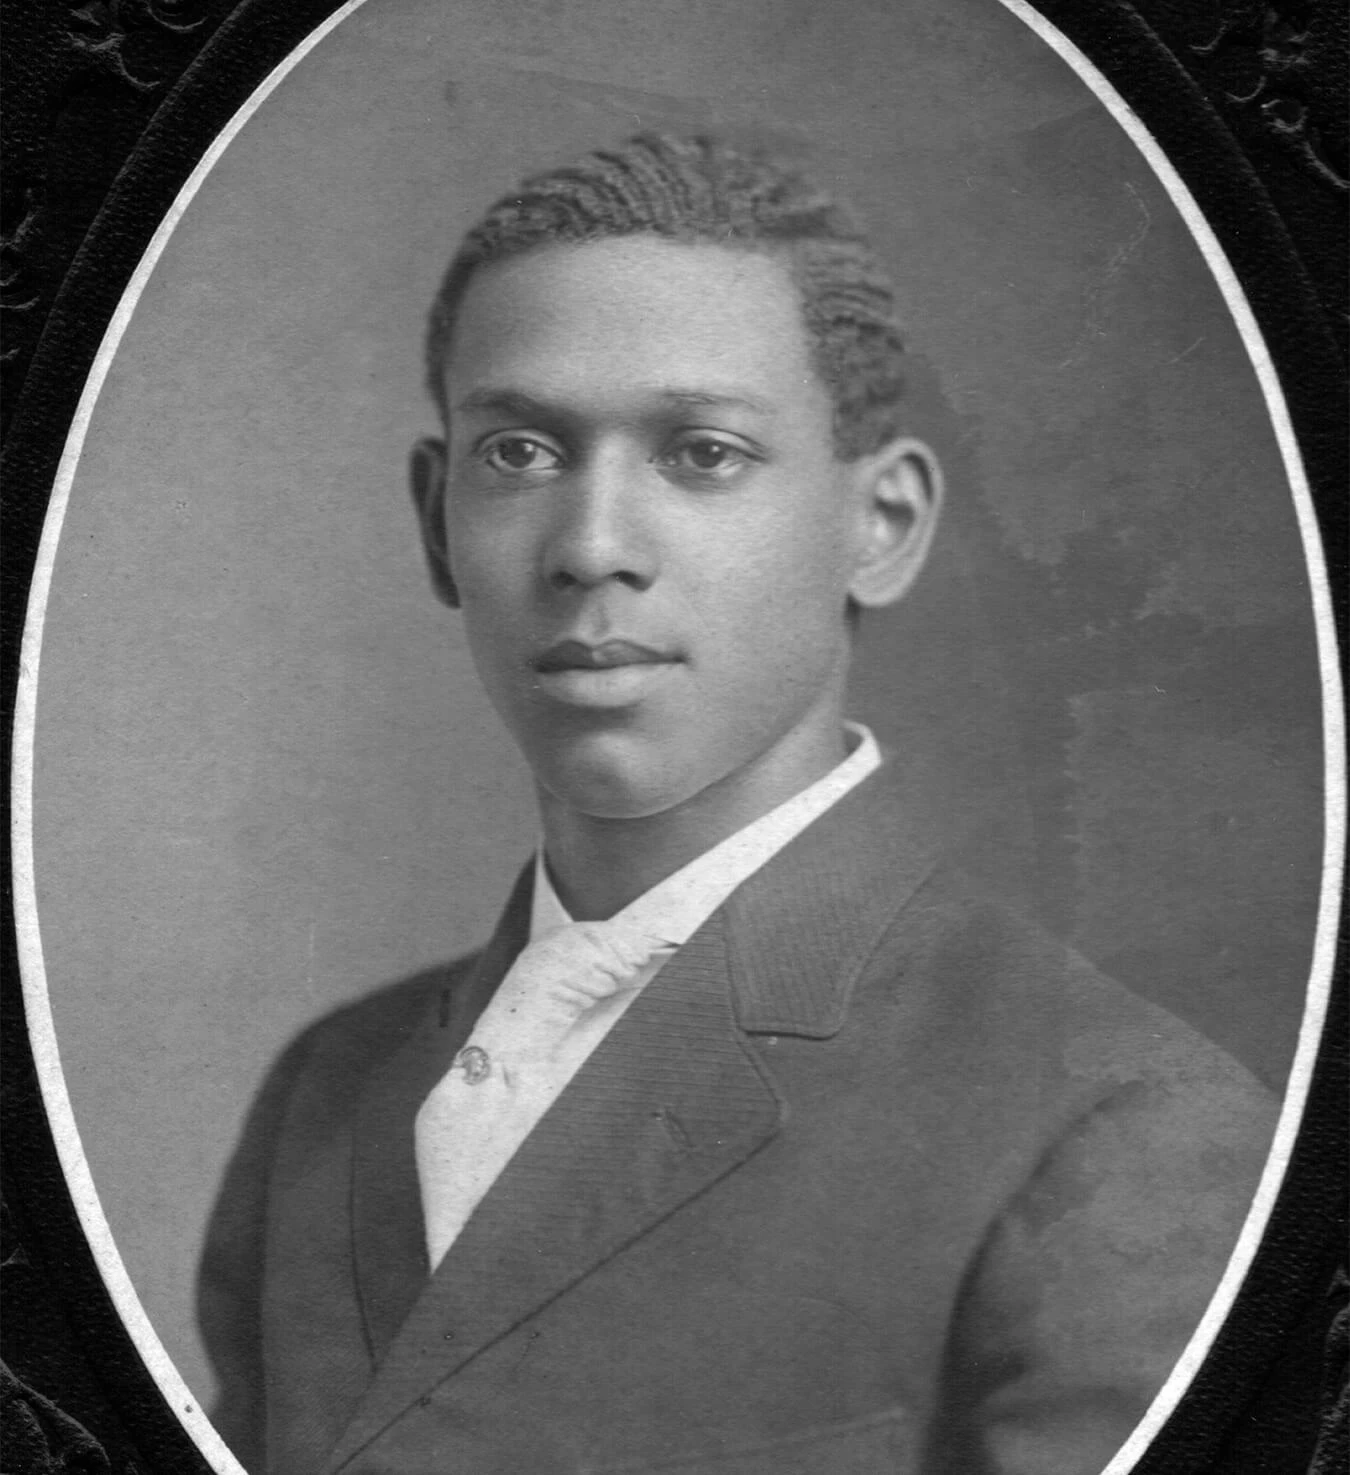 Black and white portrait of a young Black man with short hair, large ears, and wearing a dark striped suit and white shirt.